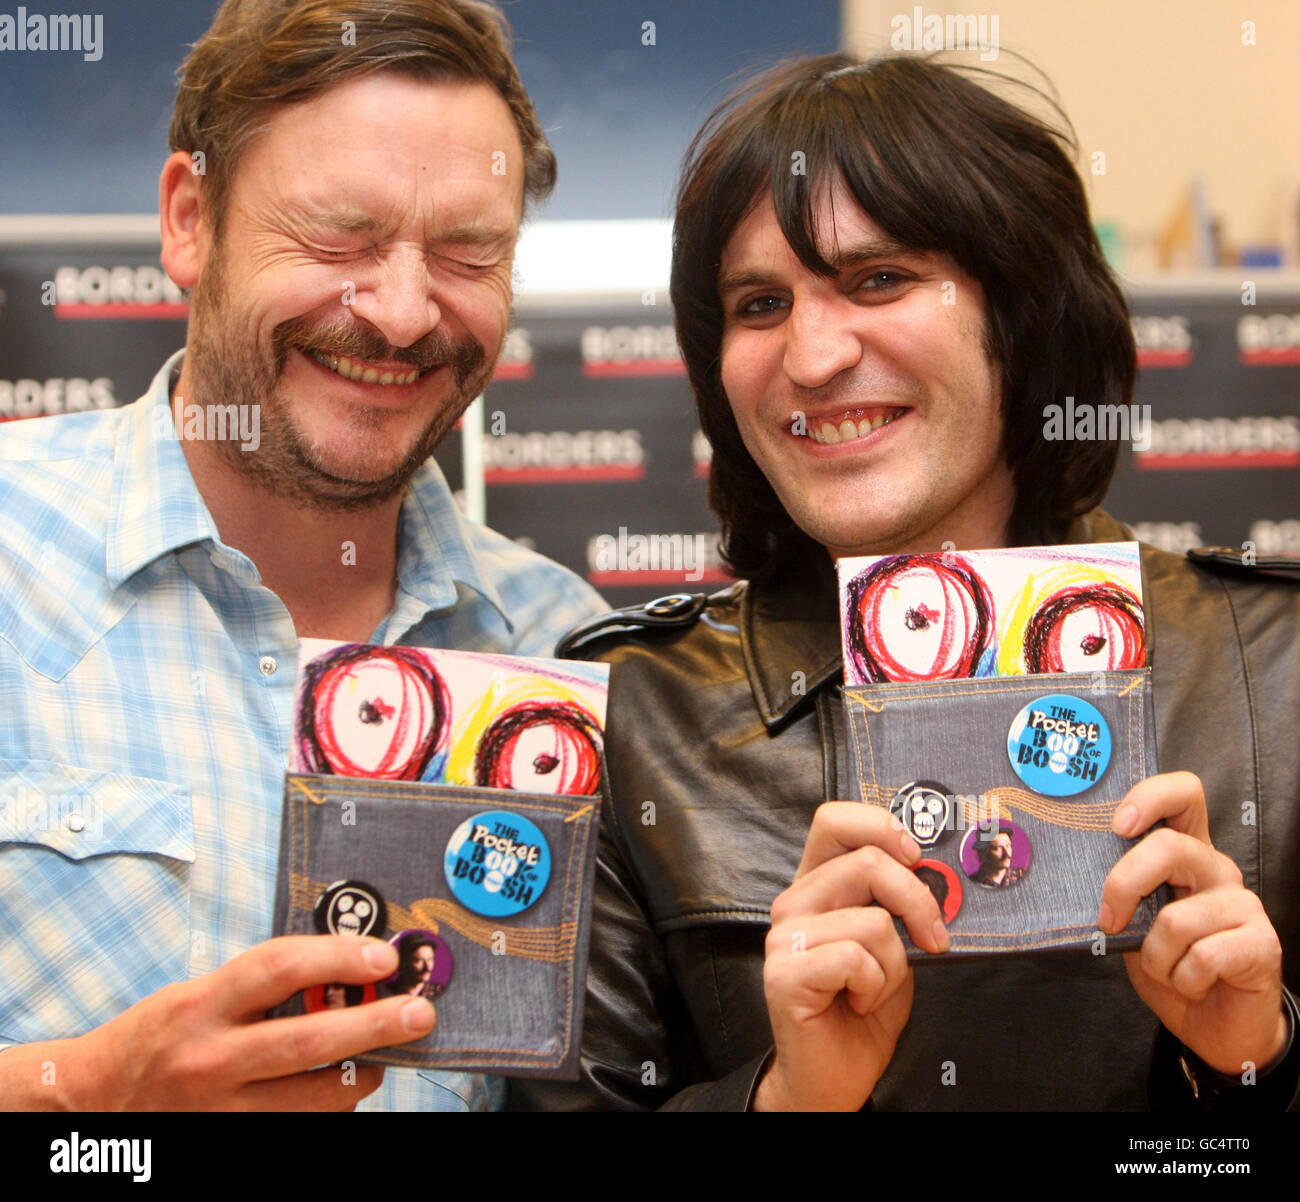 Comedy duo The Mighty Boosh, Julian Barratt (left) and Noel Fielding (right) during a signing session for their book The Pocket Book of Boosh at Borders Books in Glasgow. Stock Photo